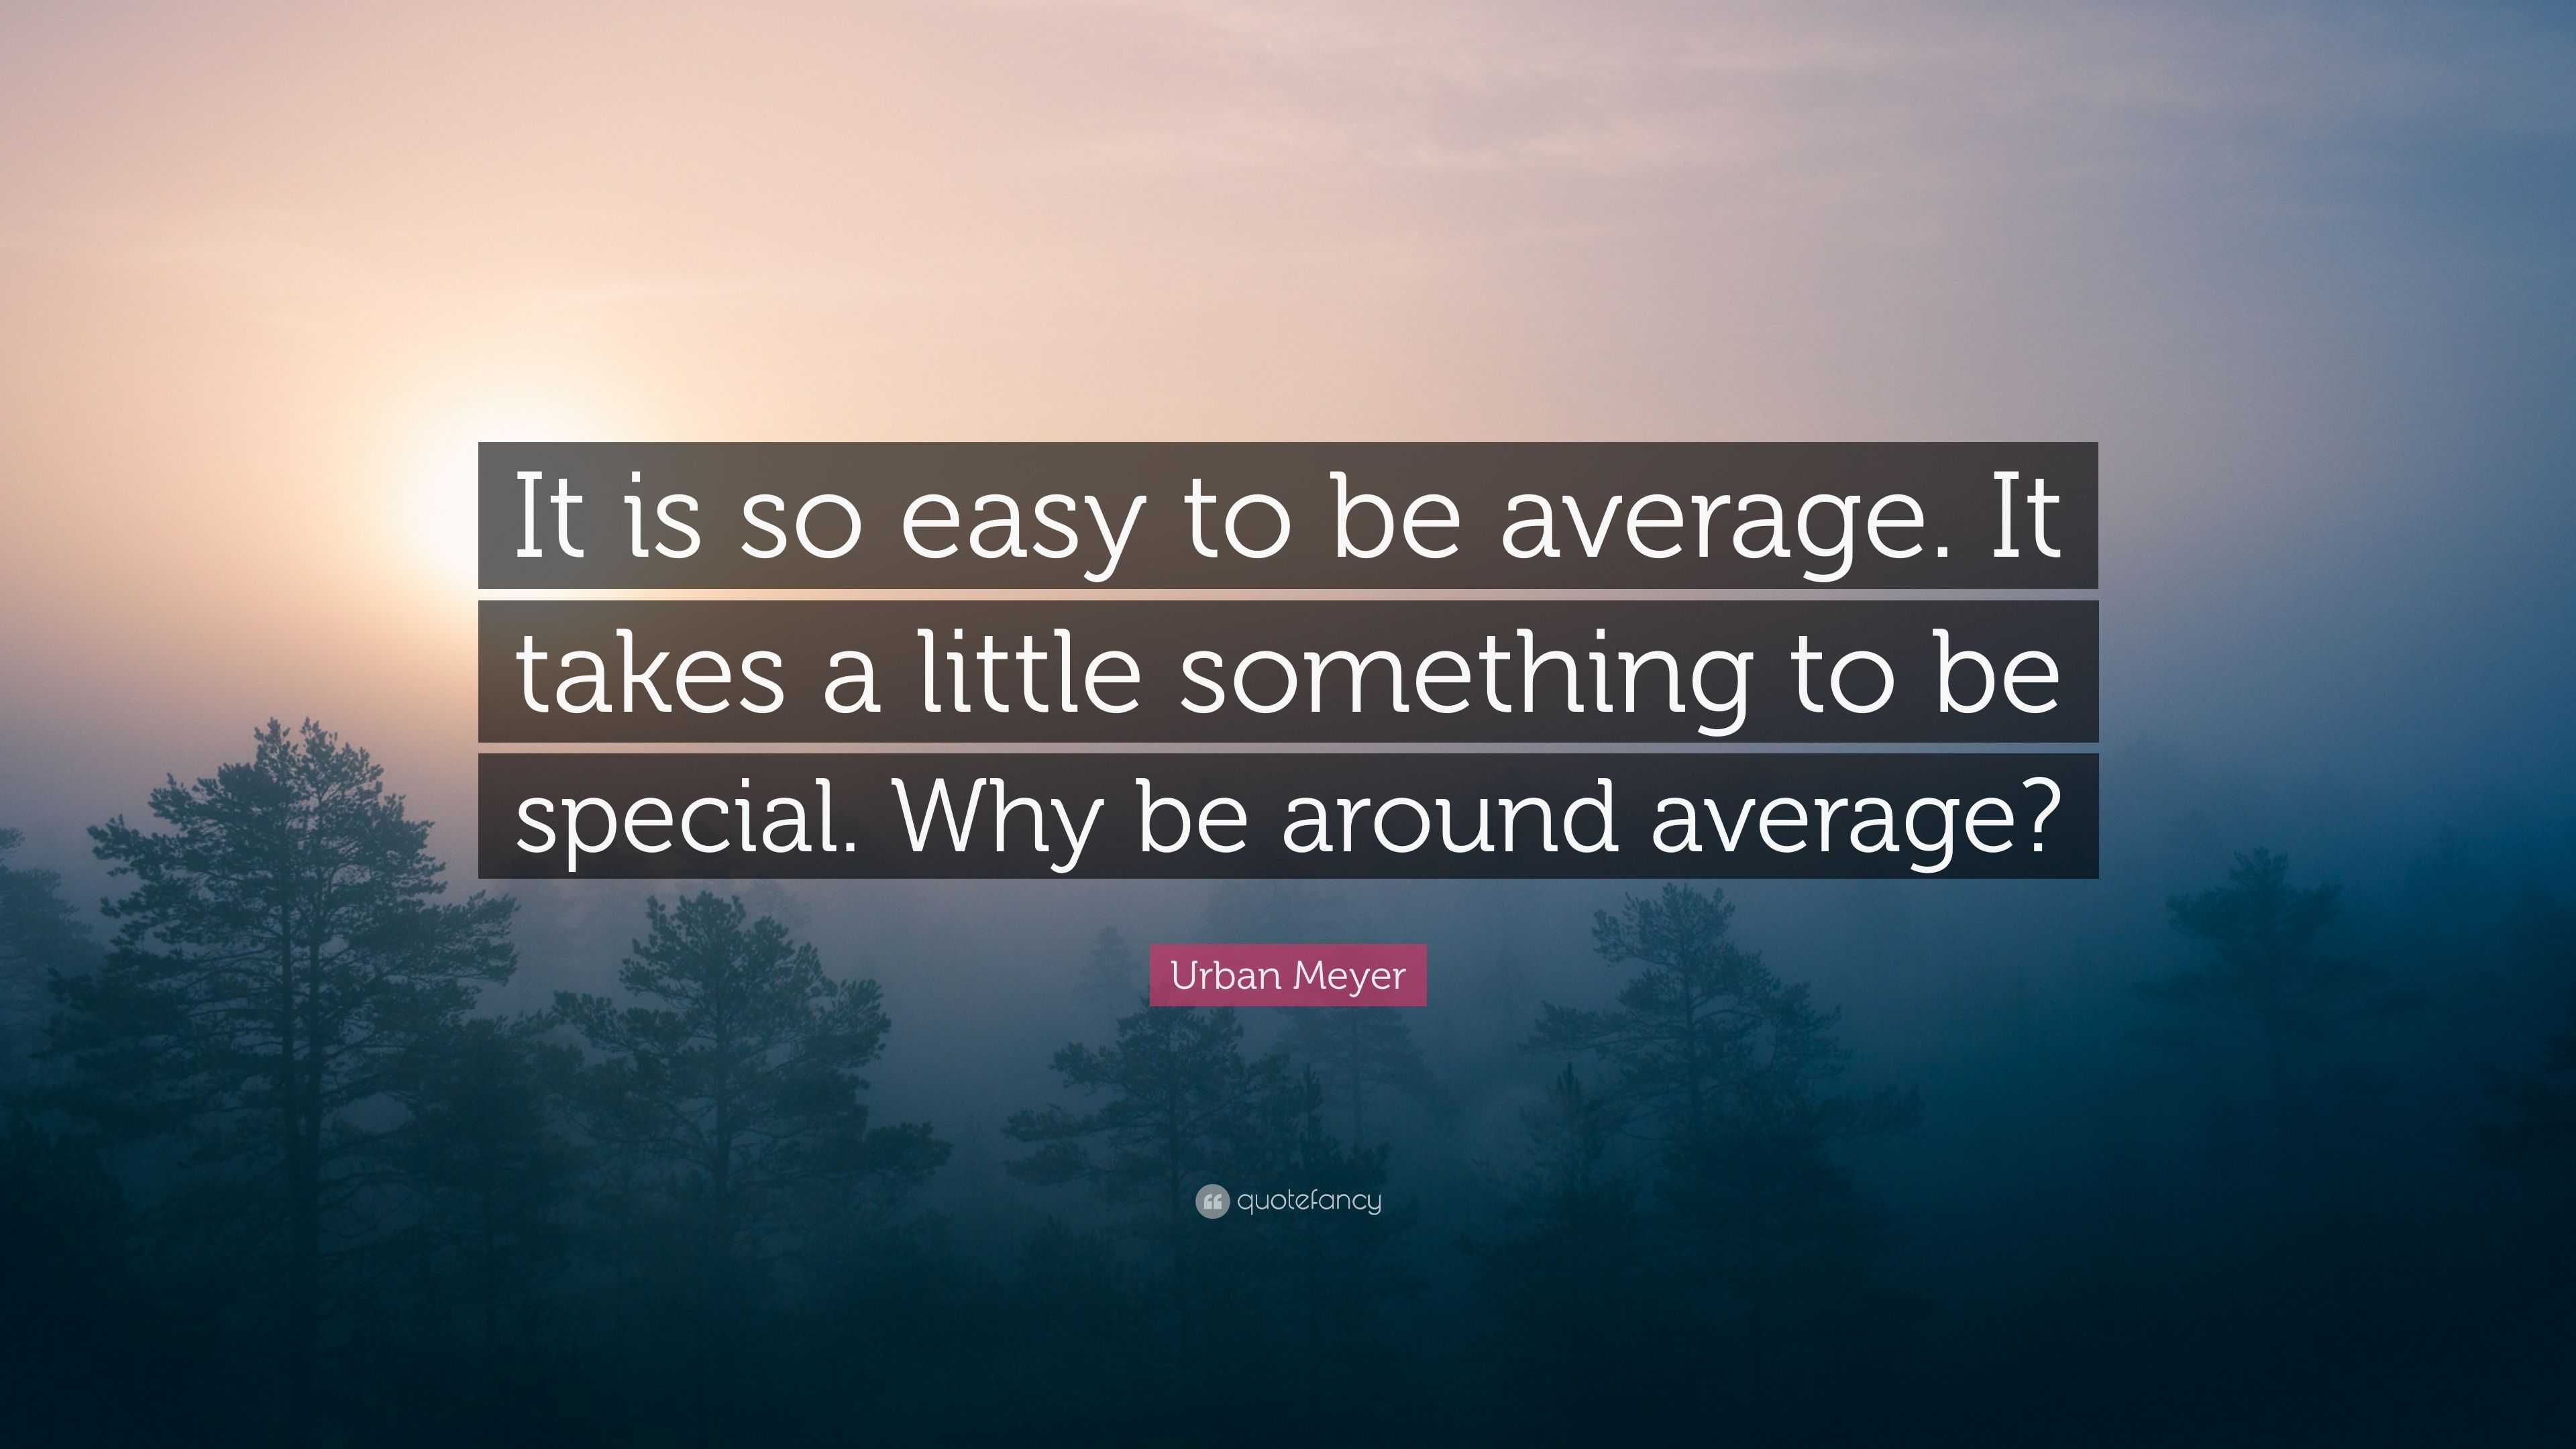 Urban Meyer Quote: “It is so easy to be average. It takes a little